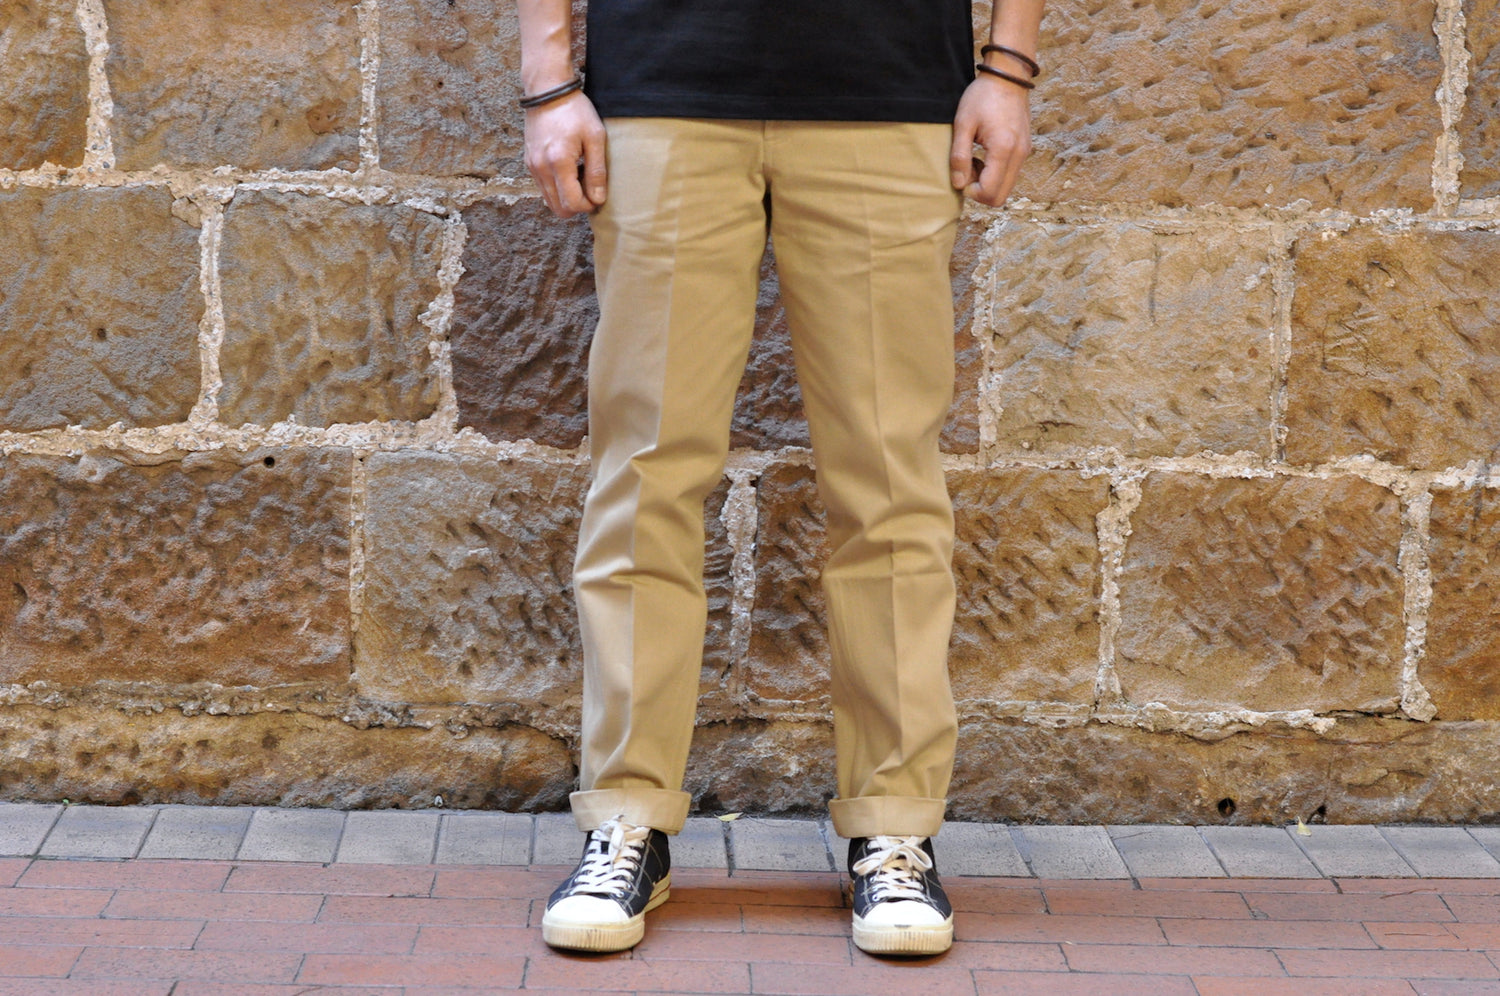 BONCOURA '41' COTTON SELVAGE DUCK CHINOS